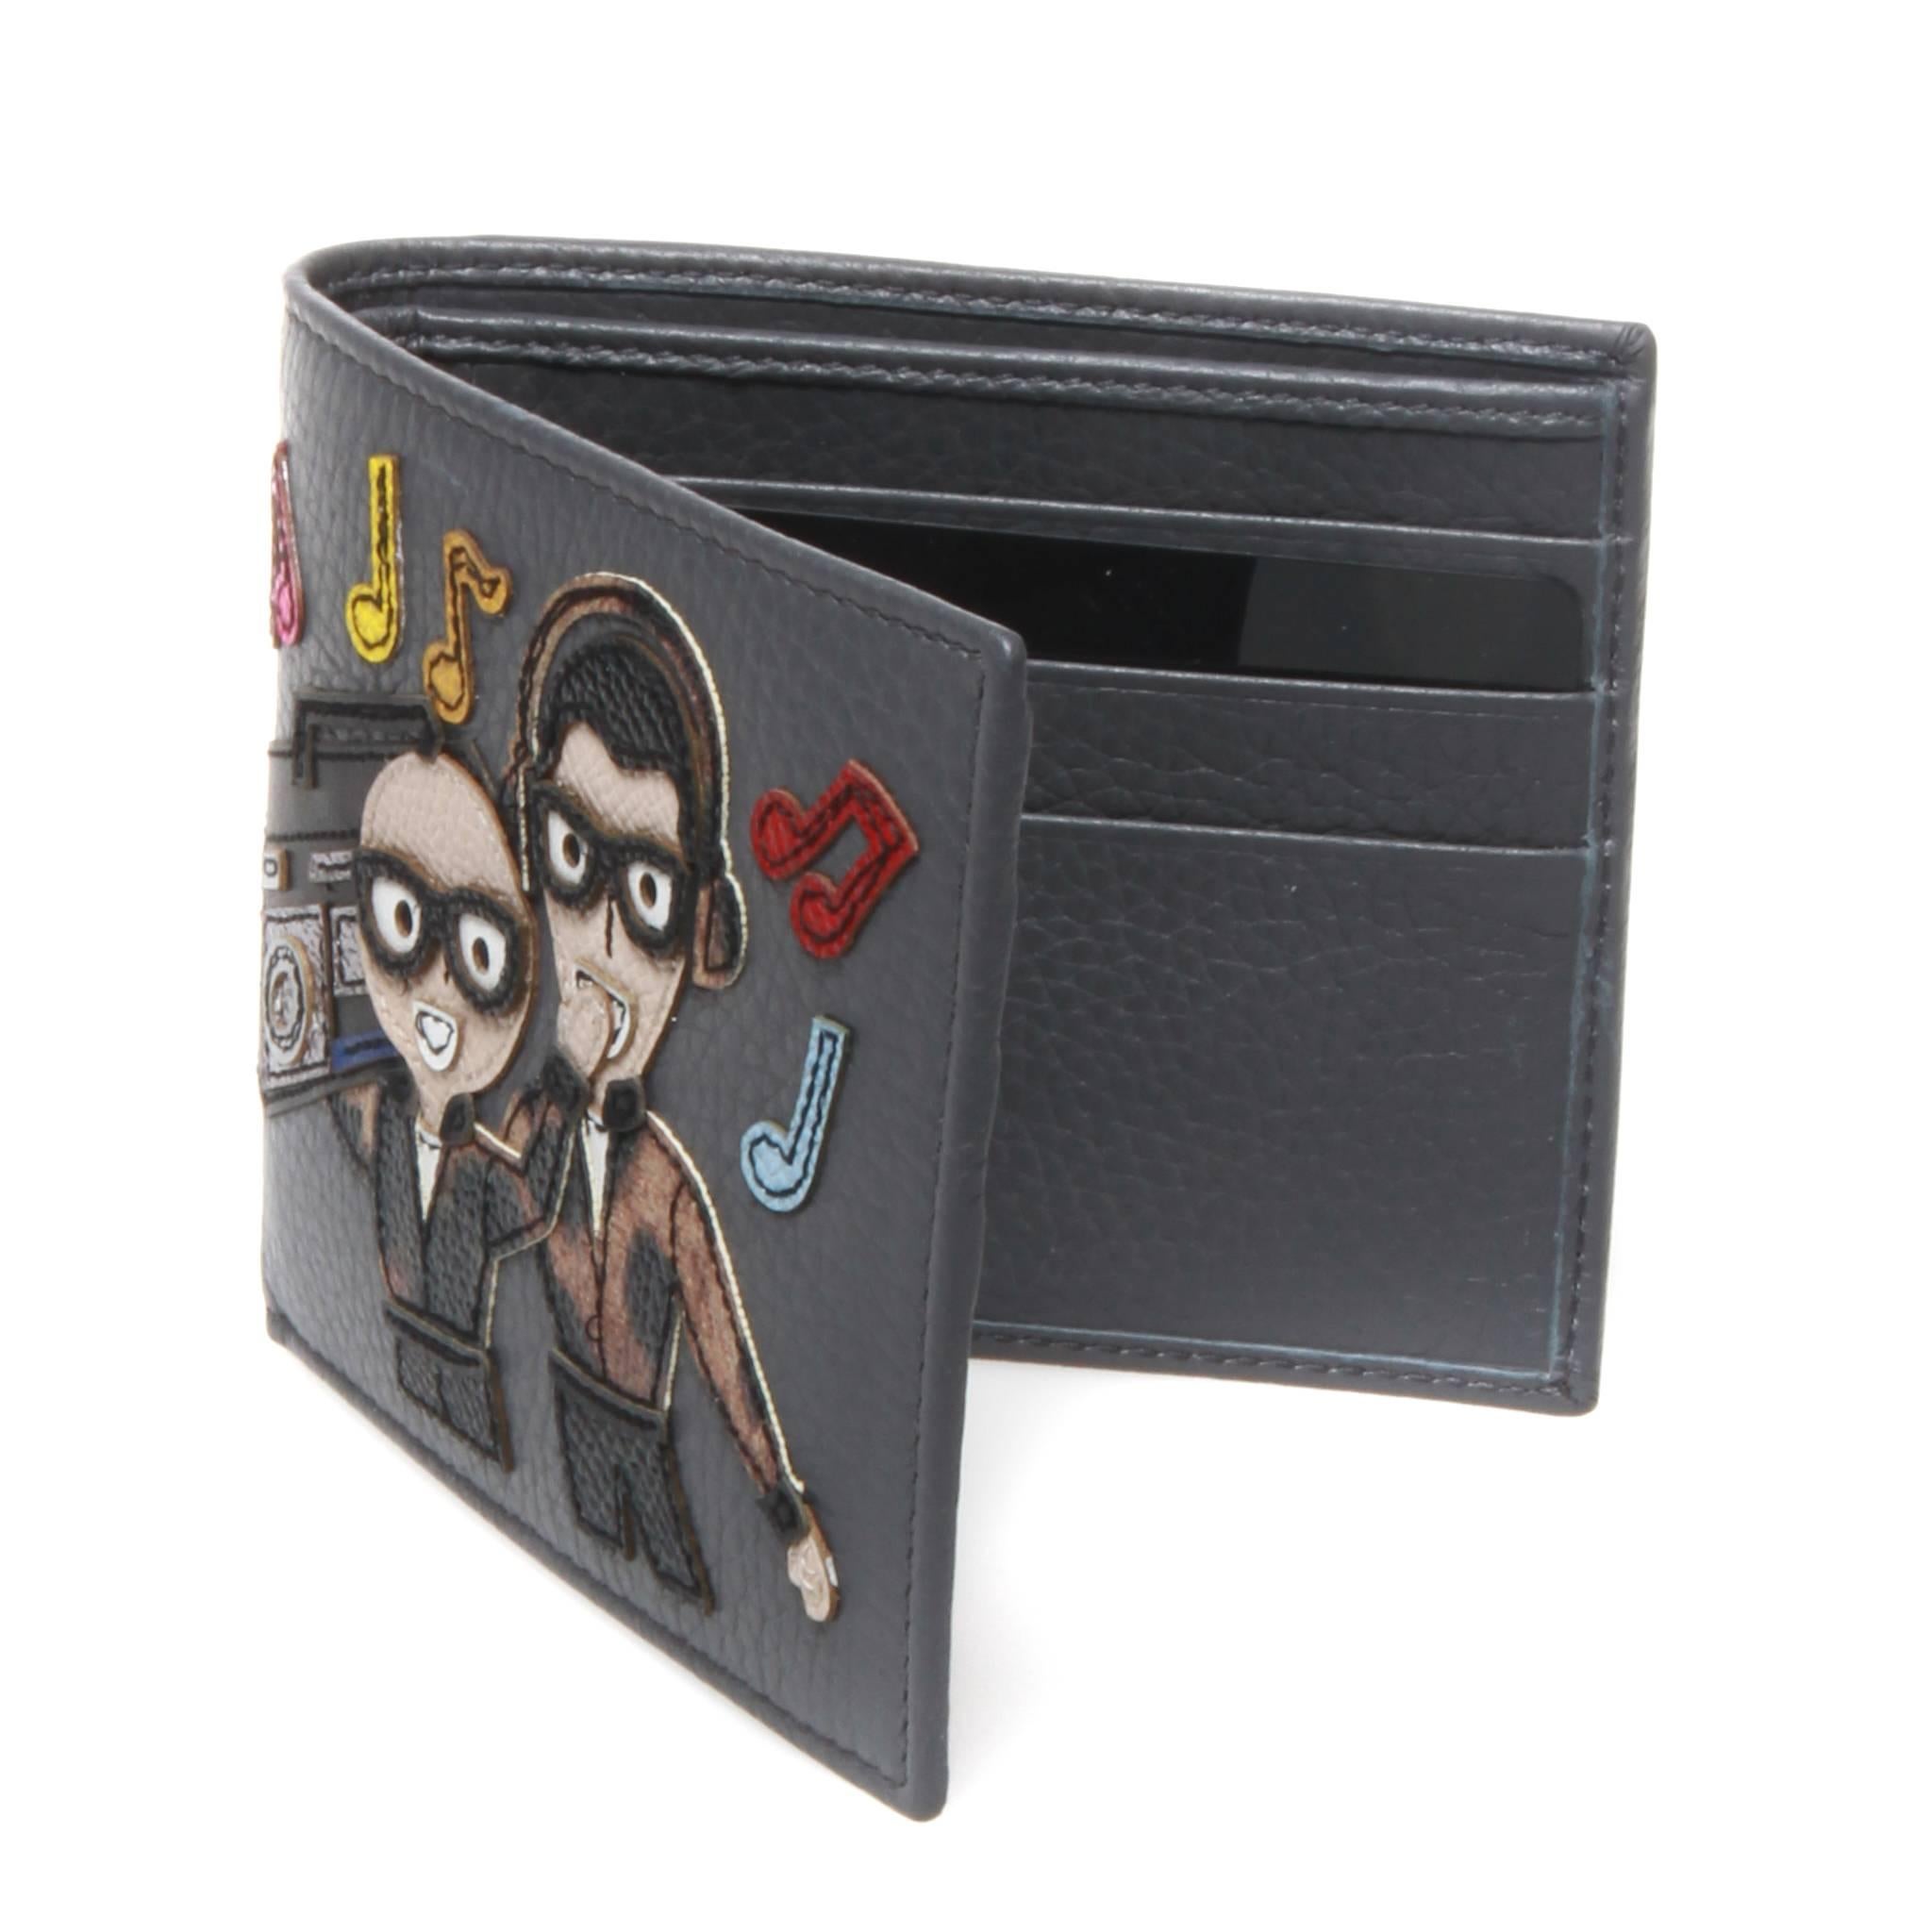 Dolce and Gabbana dark grey bi-fold dauphine calf leather wallet featuring a music themed patch graphic. Interior features 6 card slots and sleeve for notes and receipts. Gold printed brand name at back side.